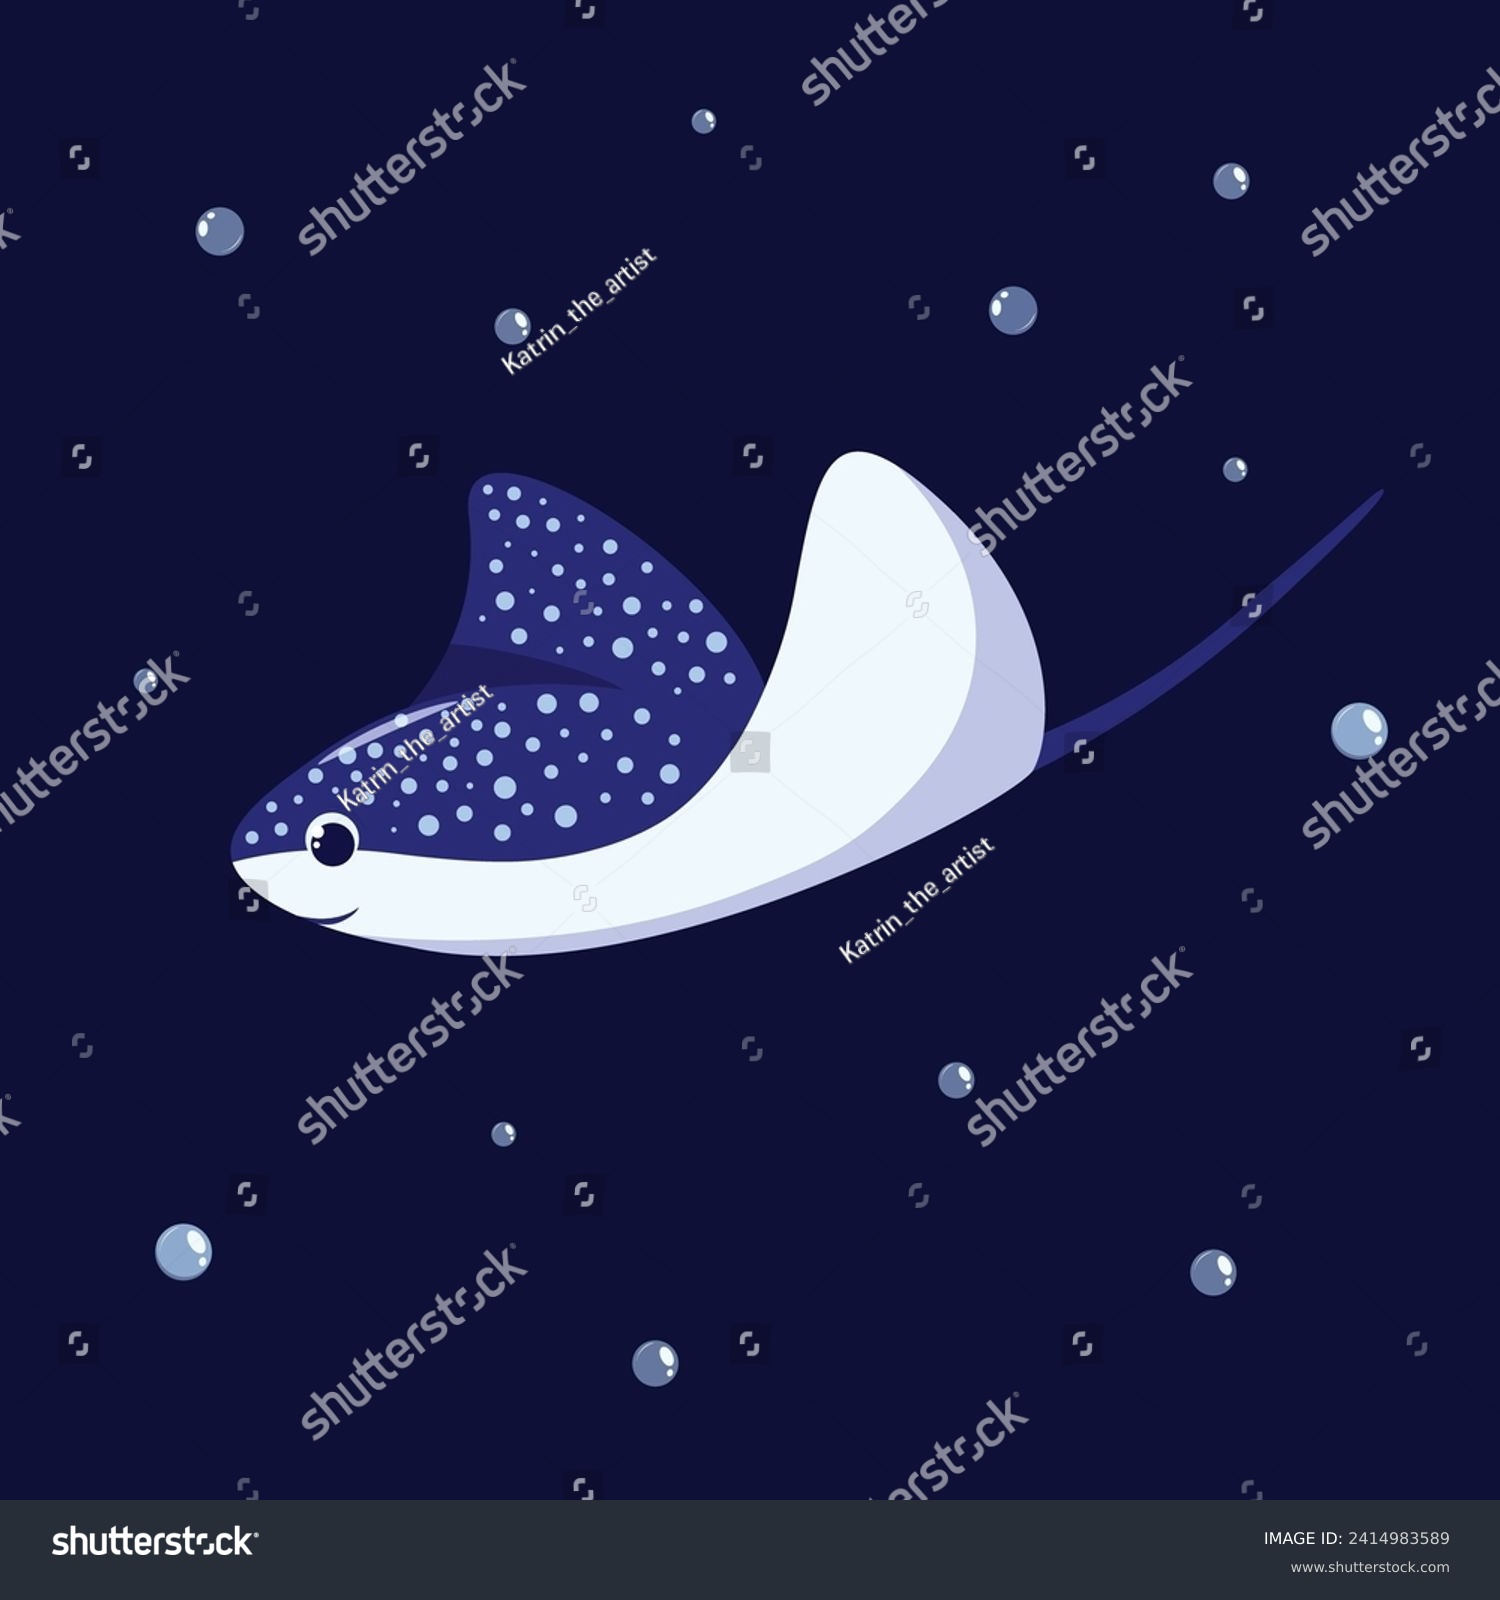 SVG of Cartoon vector drawing of a cartoon stingray on a dark background. Funny water creatures svg